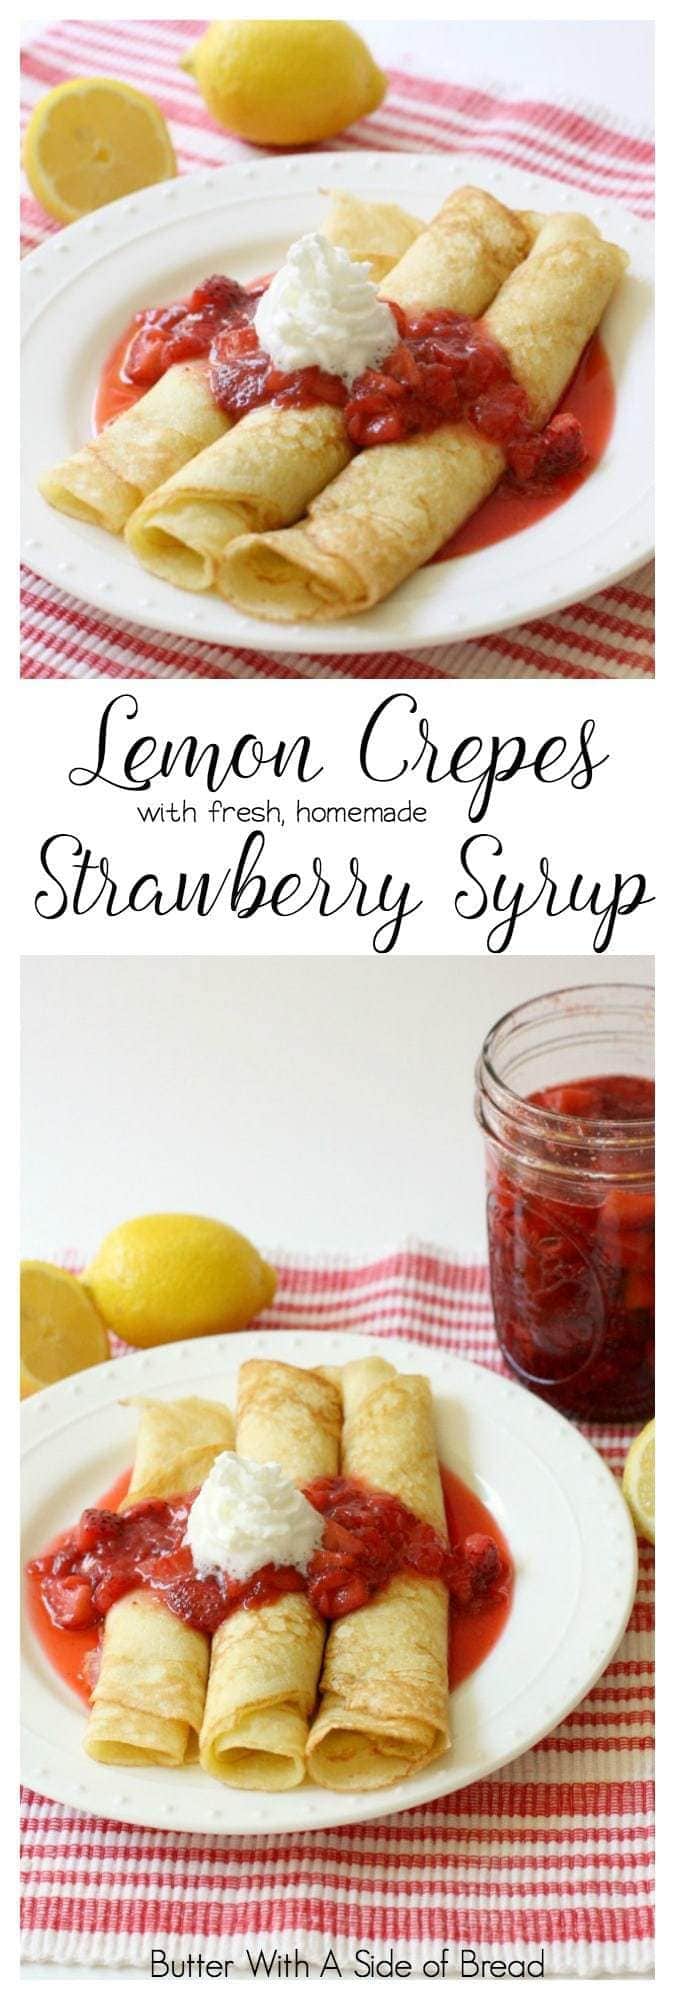 We love crepes at our house and when I found this fantastic recipe for fresh strawberry syrup, I knew I wanted to pair them with lemon crepes. It was delicious combination and everyone loved it. It was easy enough to make as far as crepes go, but they looked so pretty, you could easily serve them to guests.